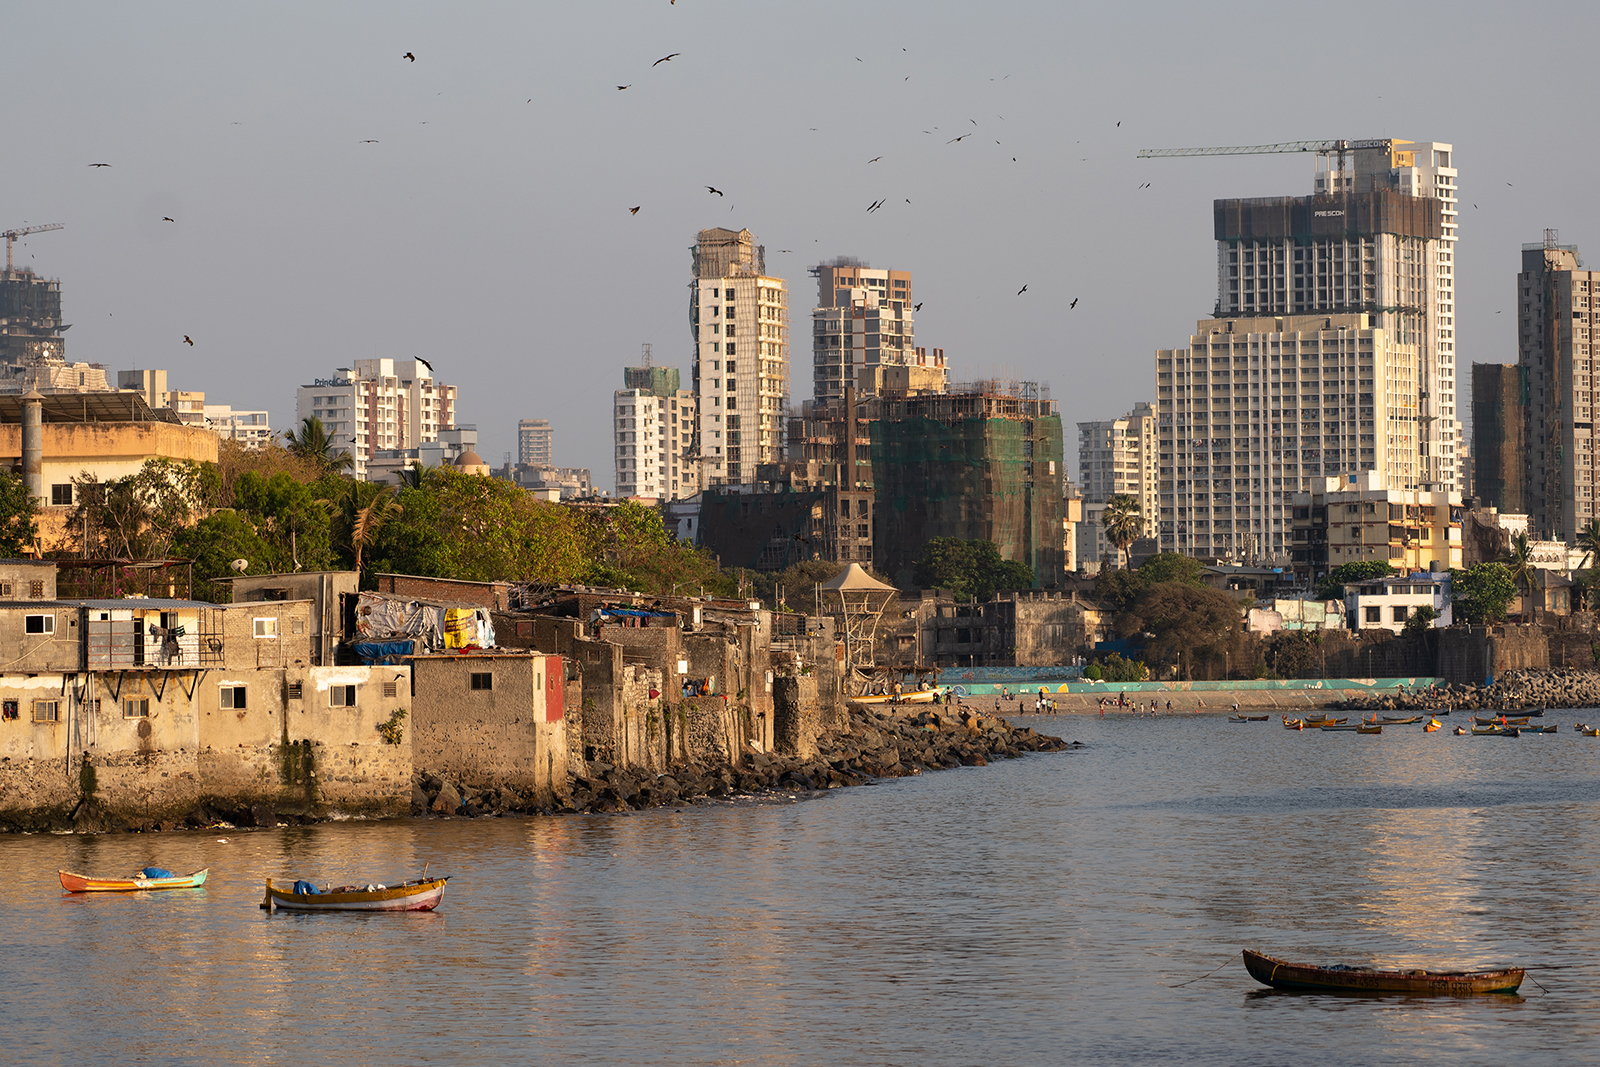 Slums are seen near commercial high-rise buildings in Mumbai, India, on April 14.